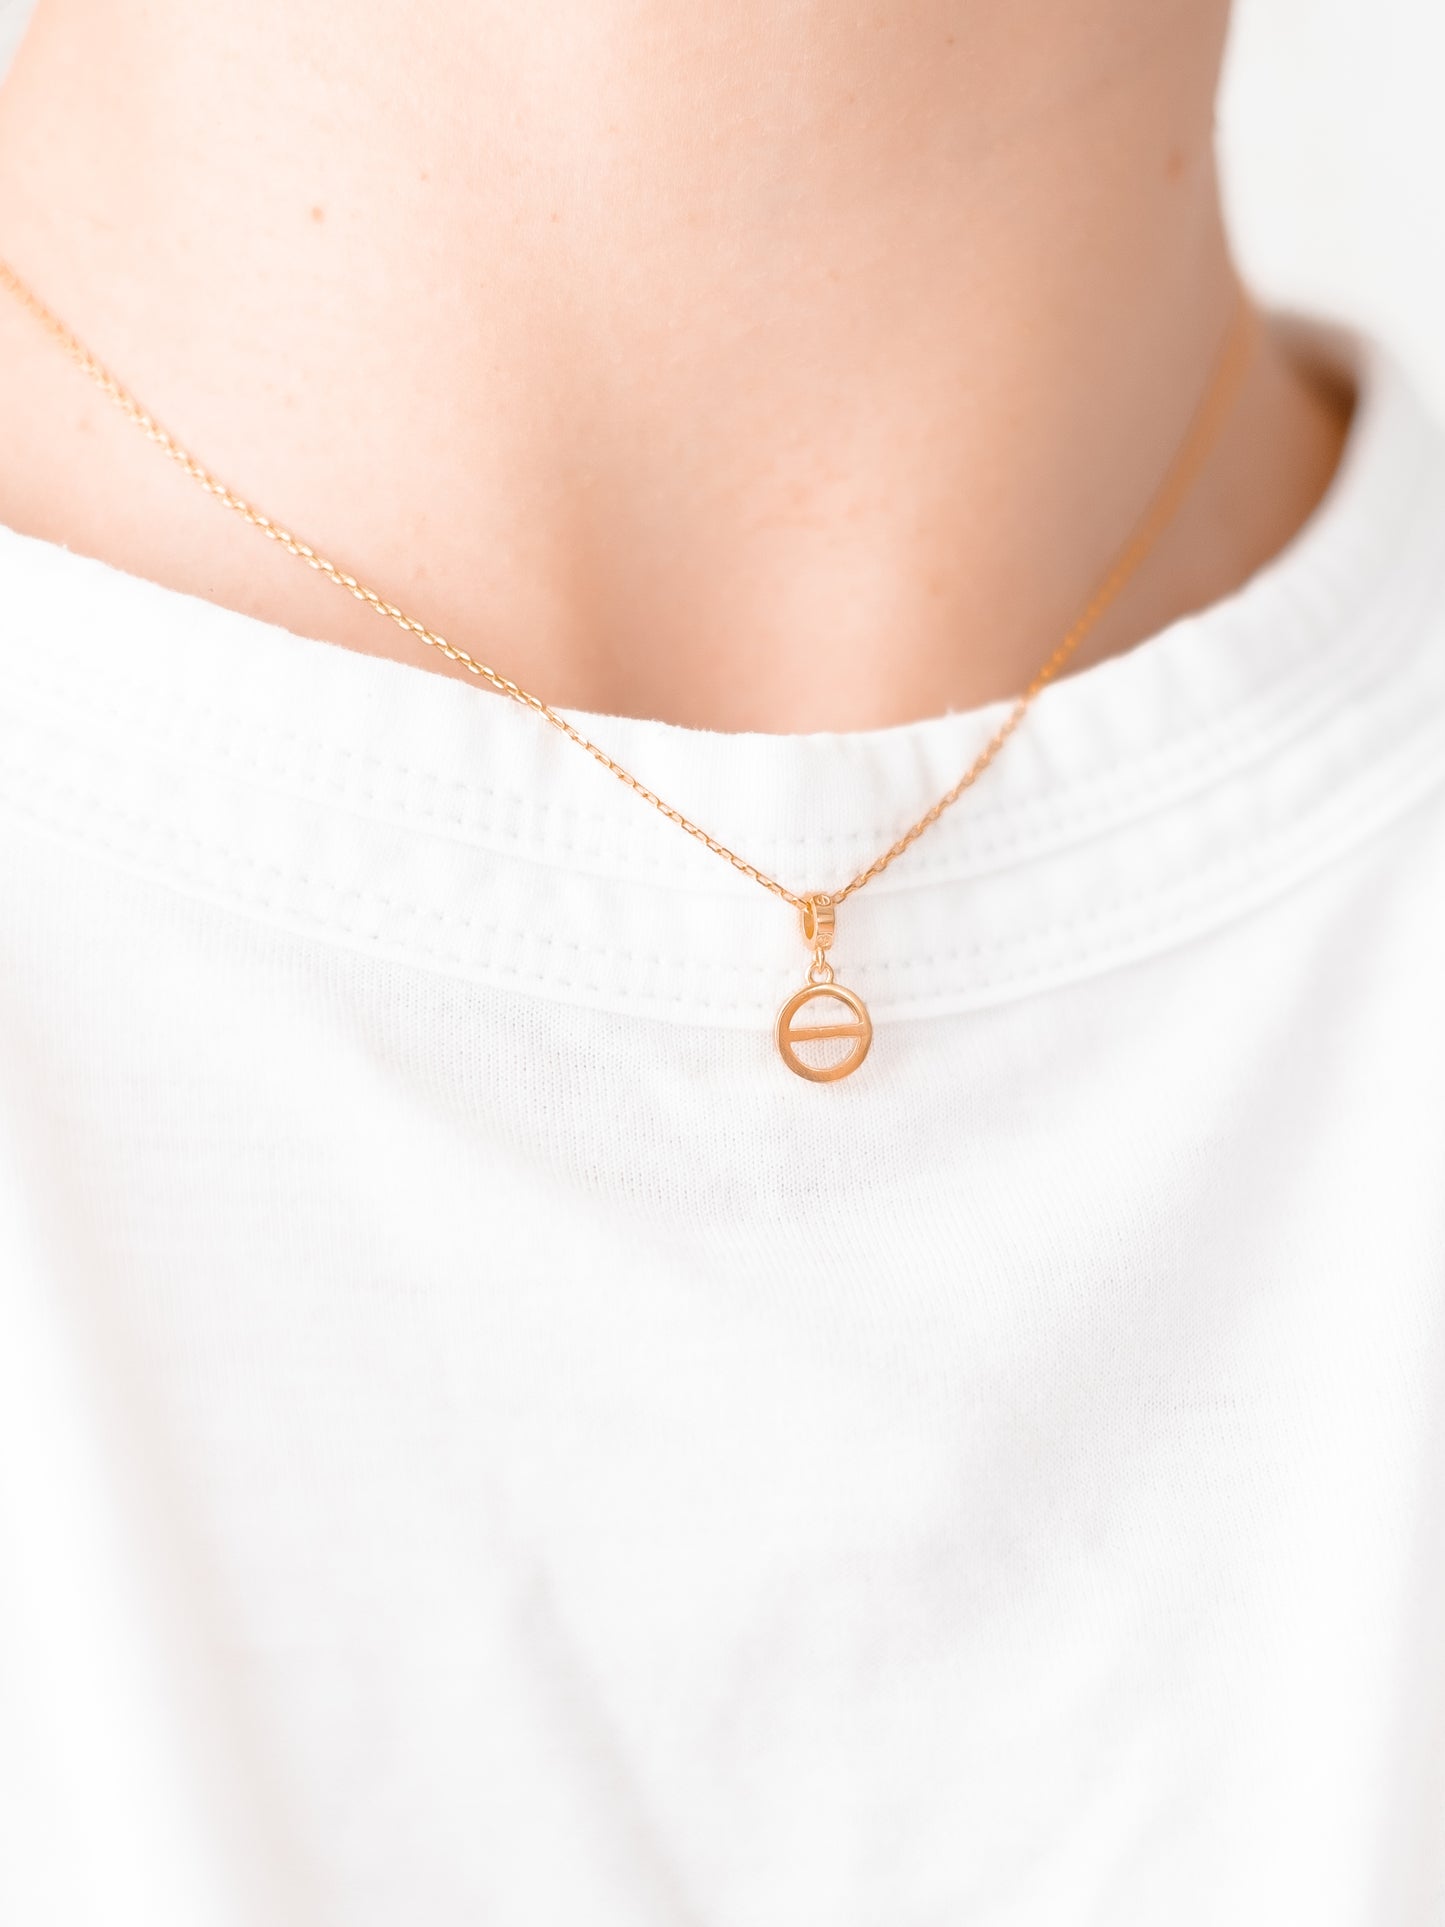 Delicate gold necklace Gold plated chain necklace with charm freeshipping - Ollijewelry